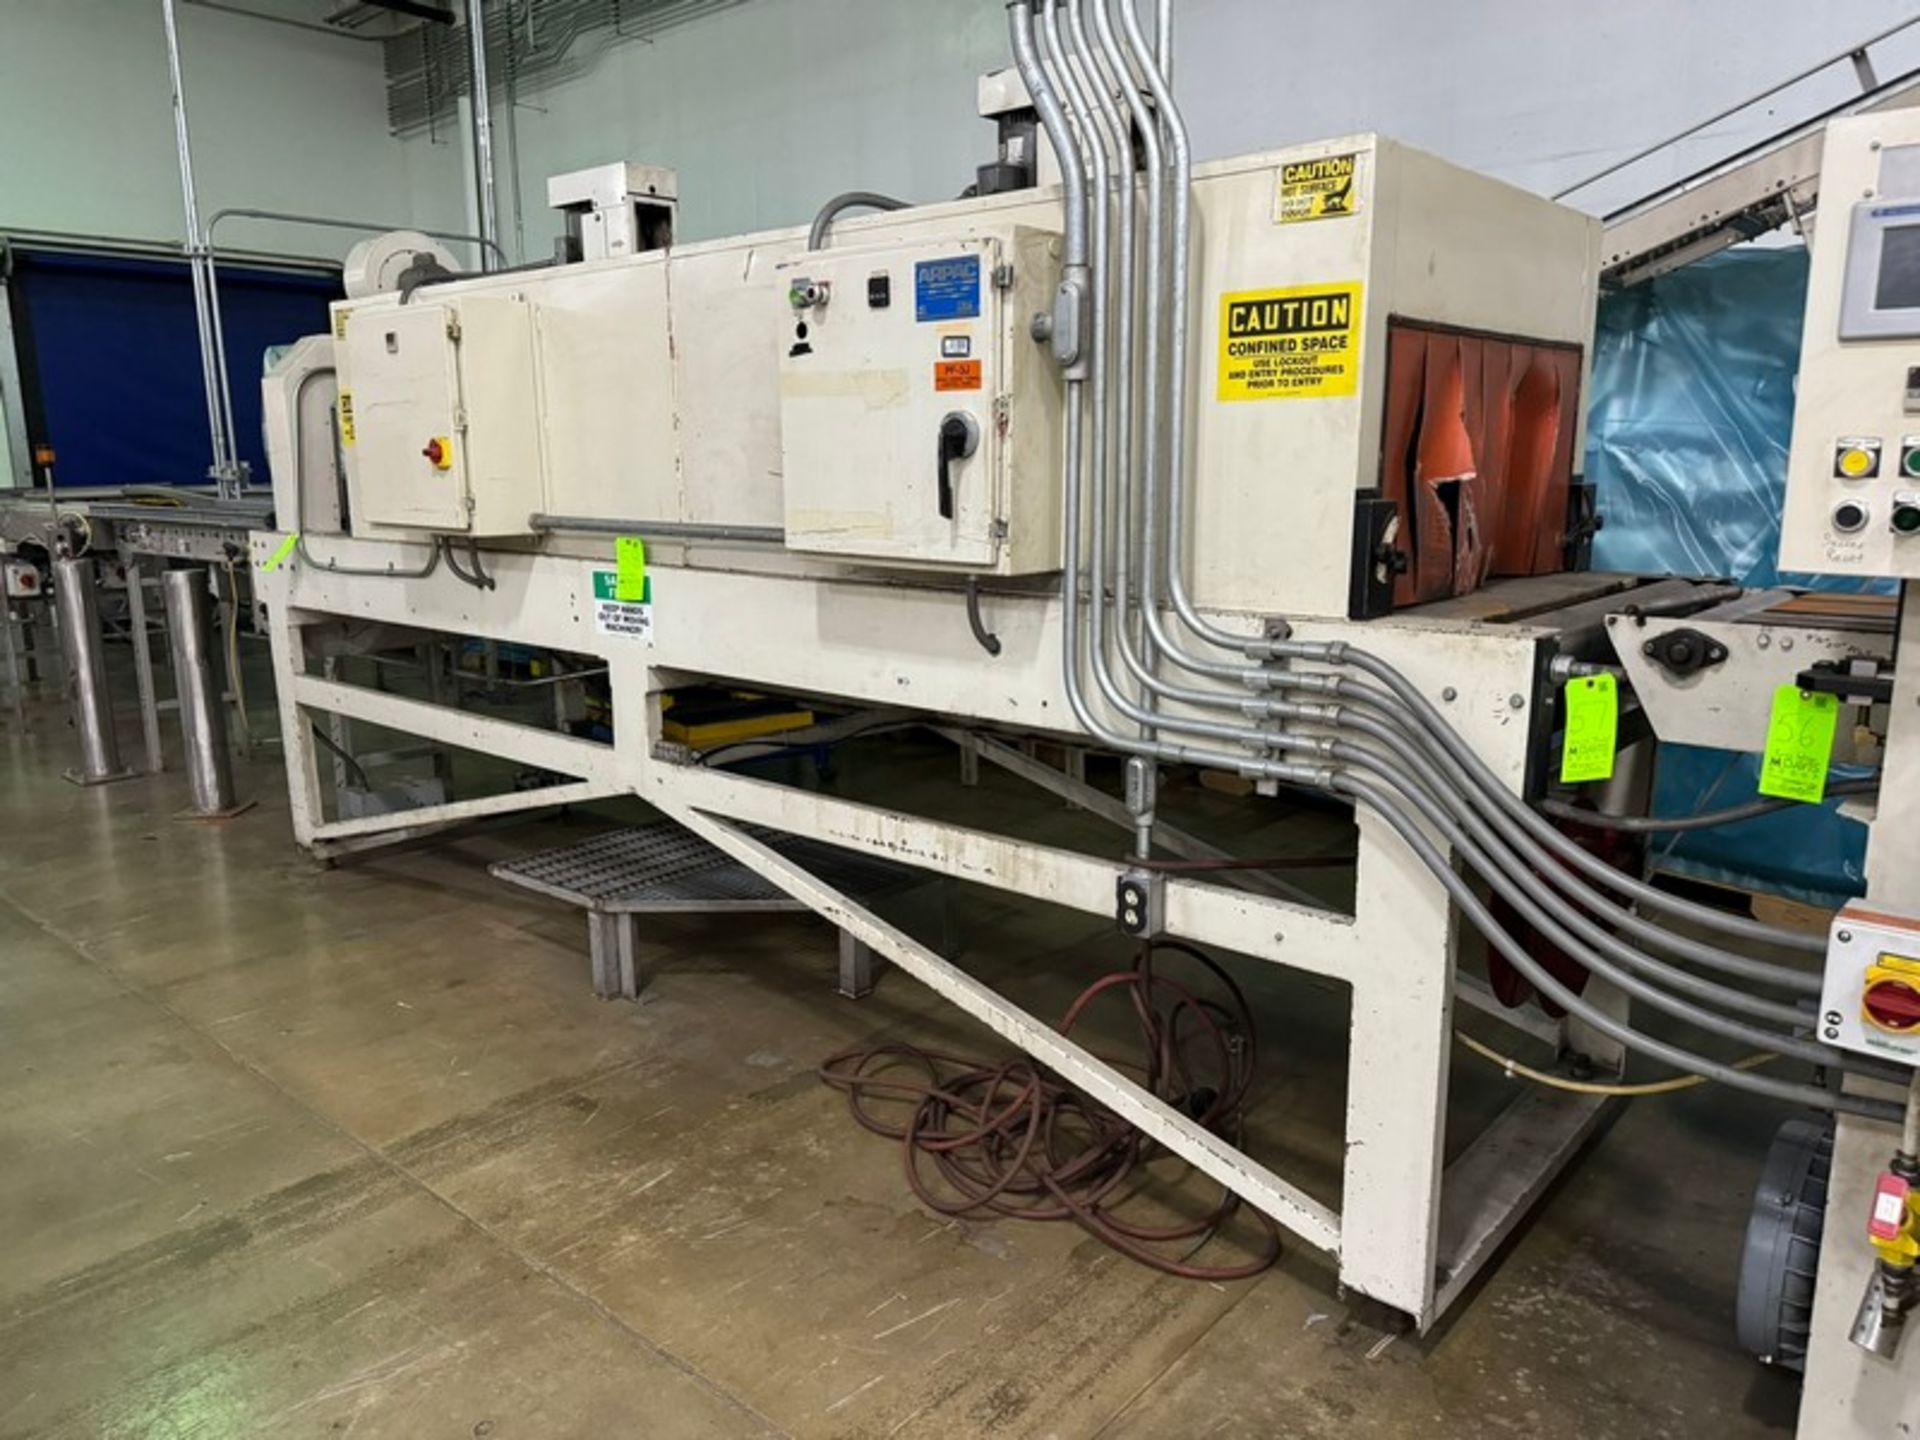 ARPAC Heat Tunnel, M/N 60-32T, S/N 2240, 460 Volts, 3 Phase, with Aprox. 36” W Conveyor Bed, with